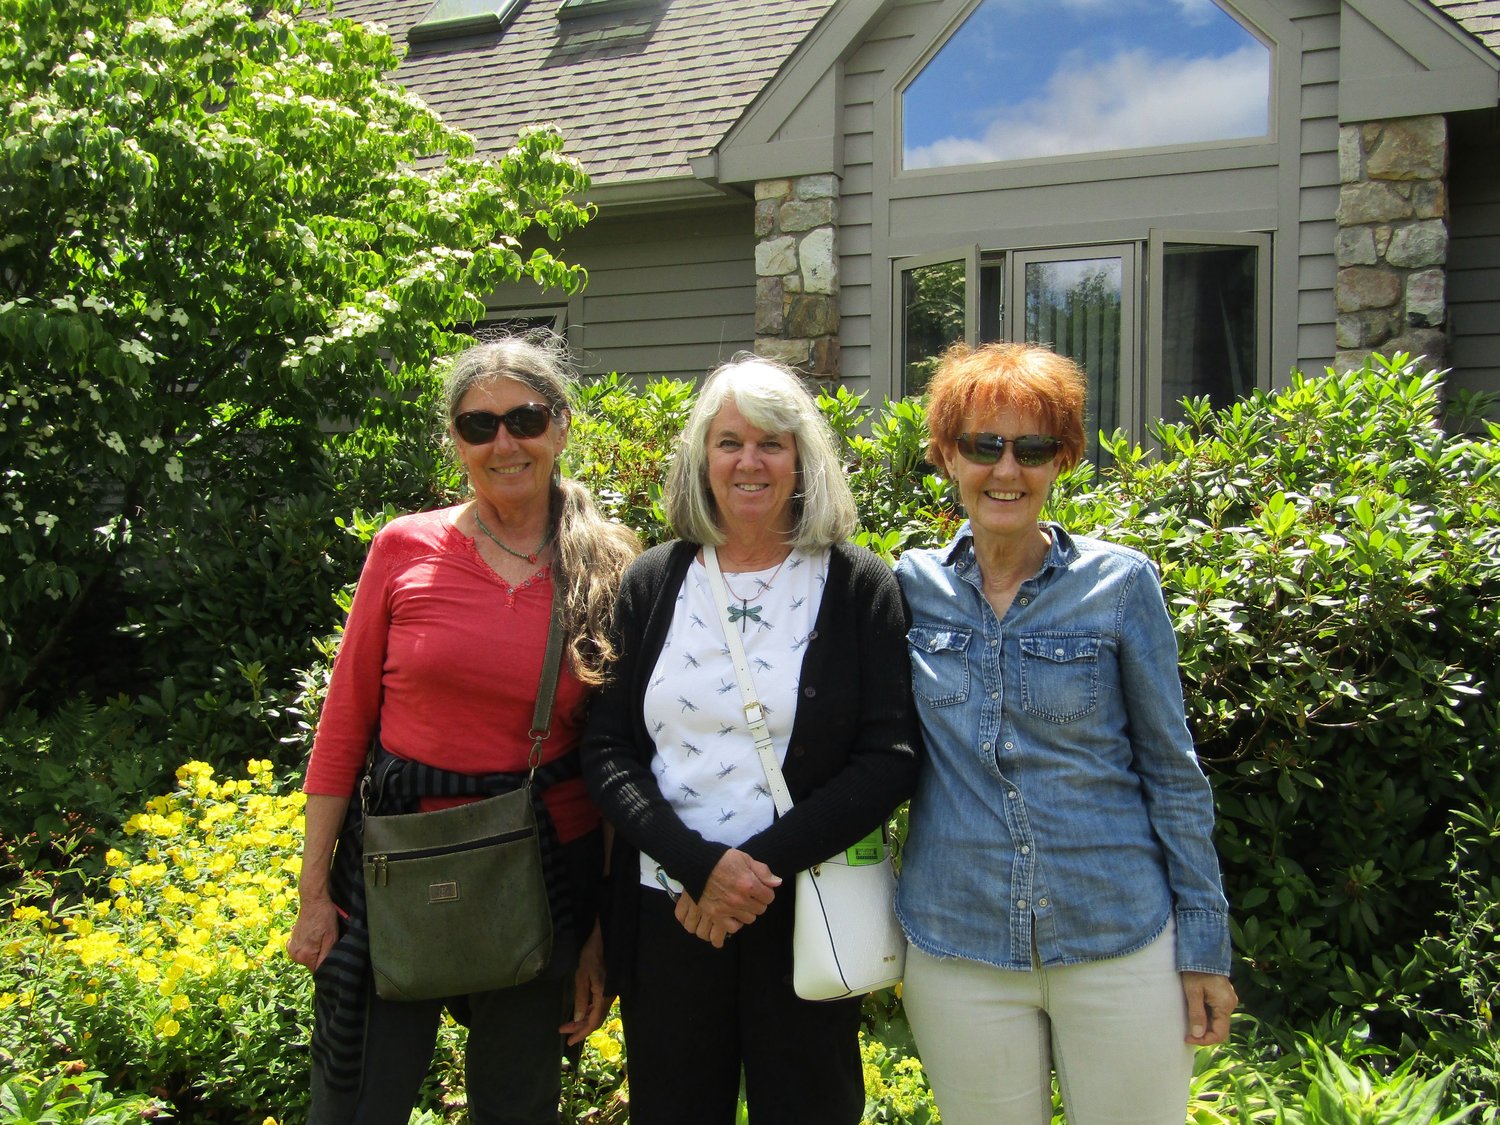 Trica Deering, Sandy Phelps and Susan Haake at the Carota garden.